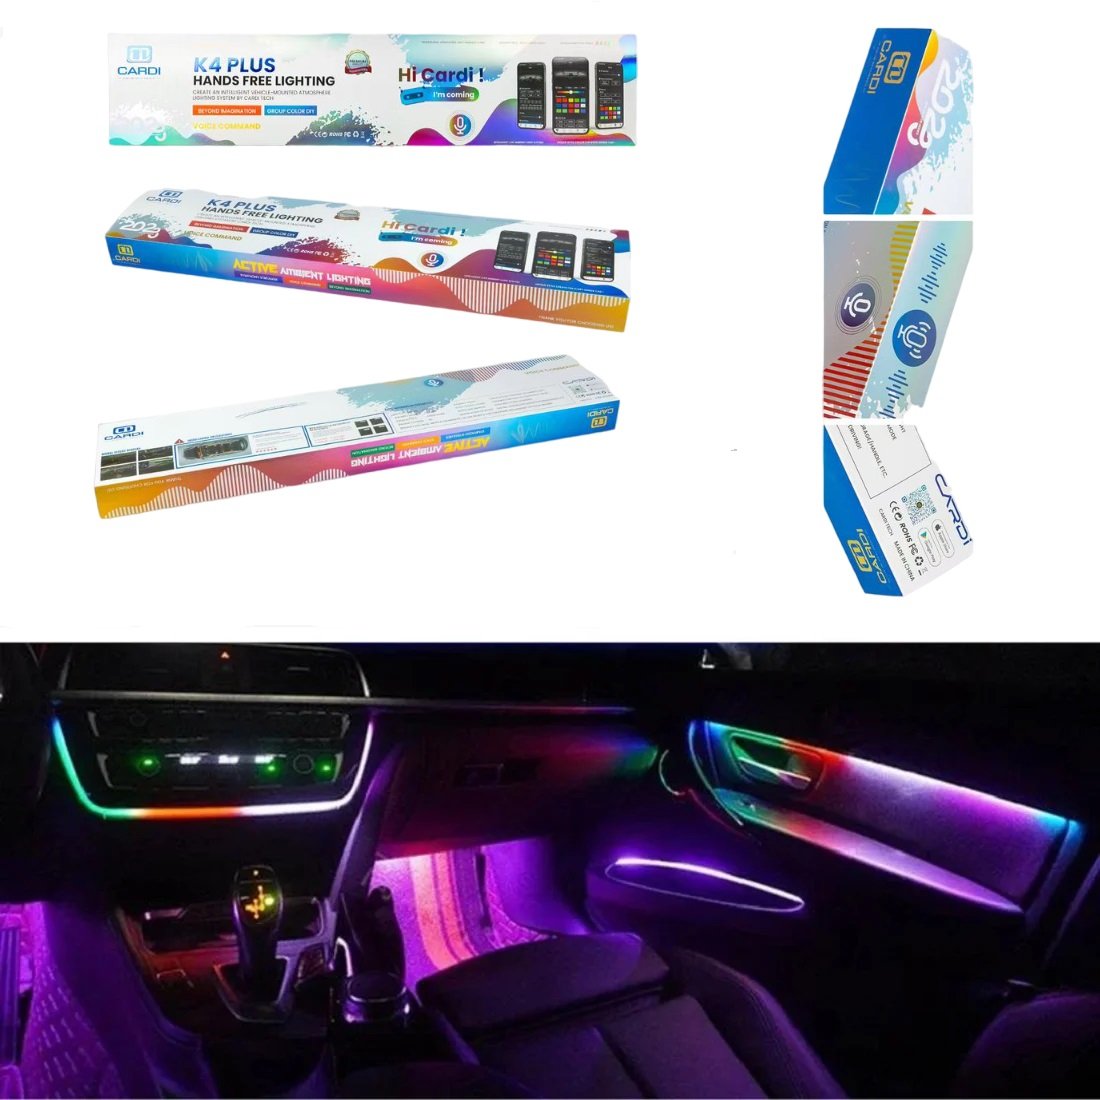 Cardi K4 Active Ambient Light Symphony Mode 7th Generation 18 in 1 wireless LED Atmosphere Lights for Automotive Car Interior Ambient acrylic strips (6 months warranty) Image 